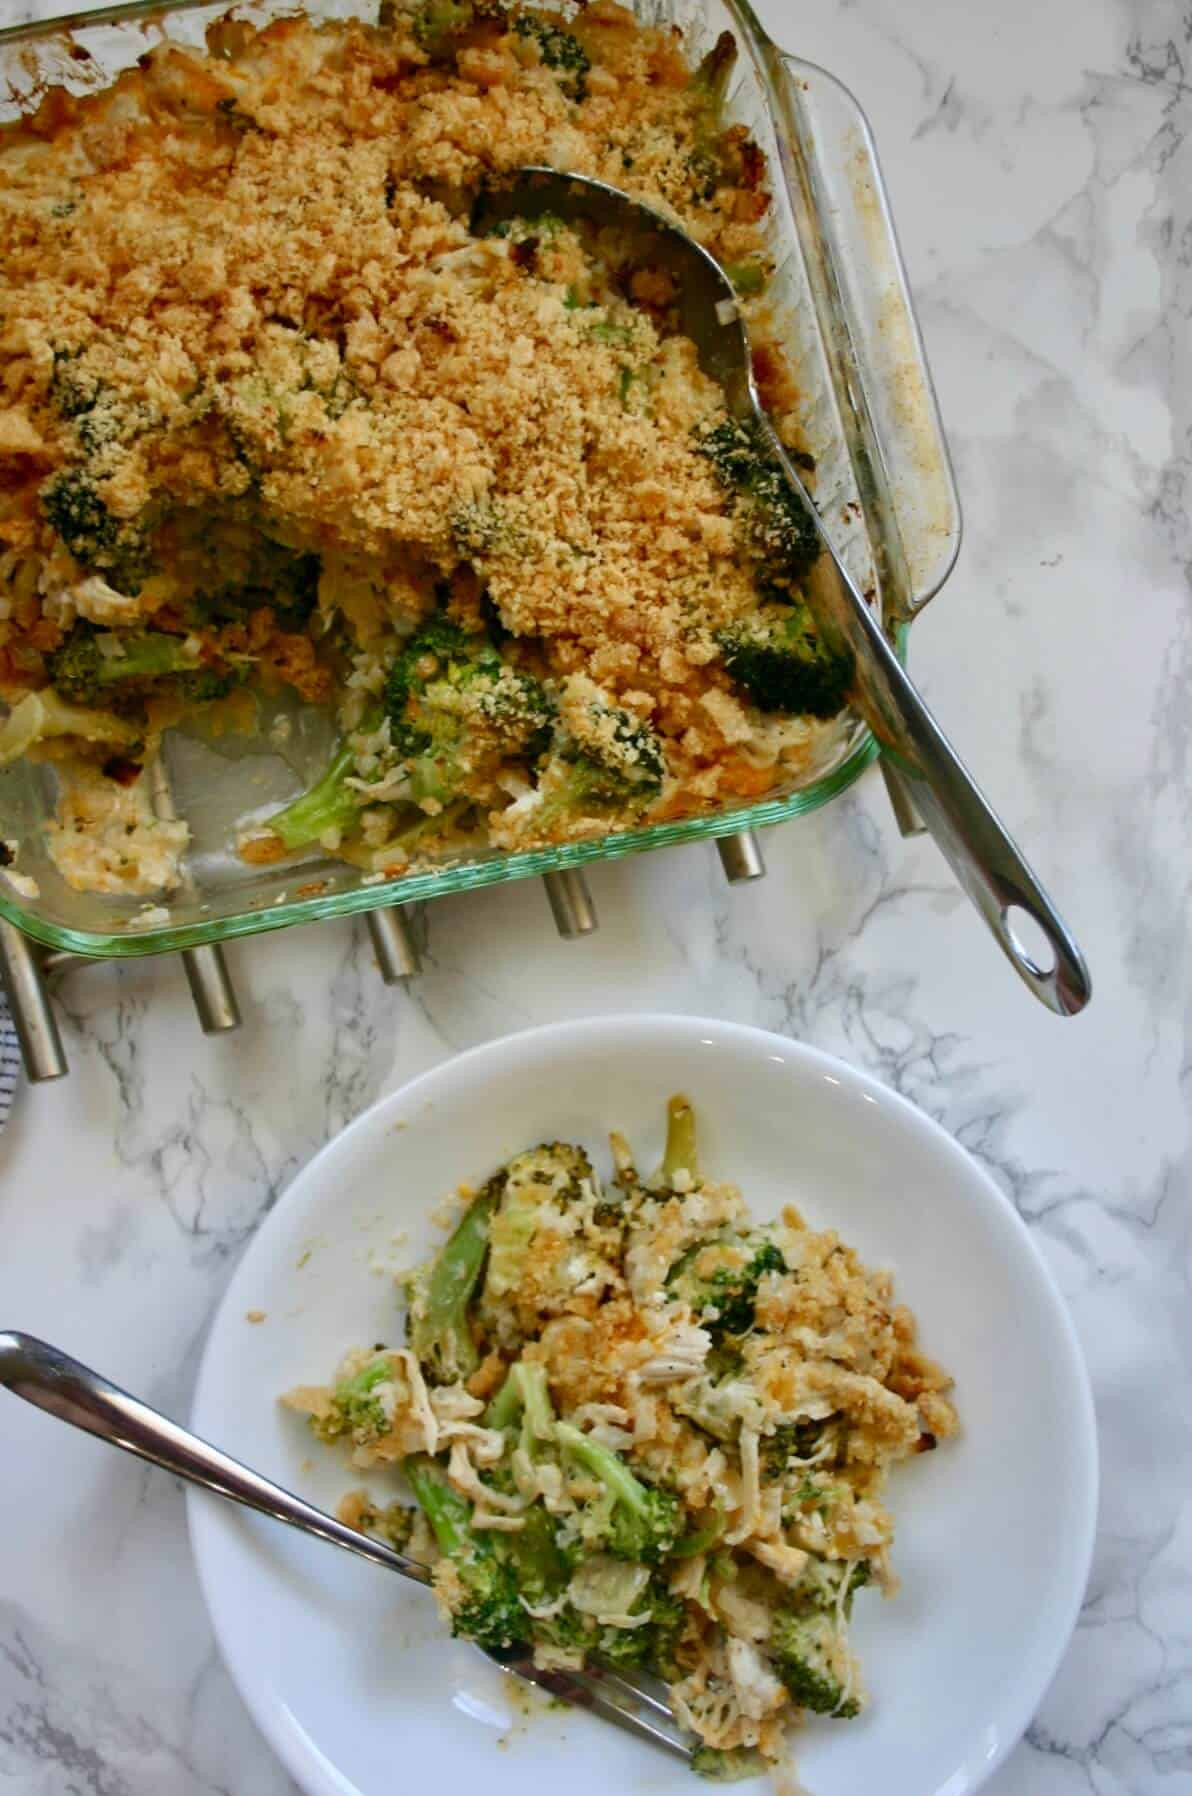 Chicken Broccoli Casserole Low Carb Best Of Low Carb Chicken Broccoli Casserole the Savvy Sparrow